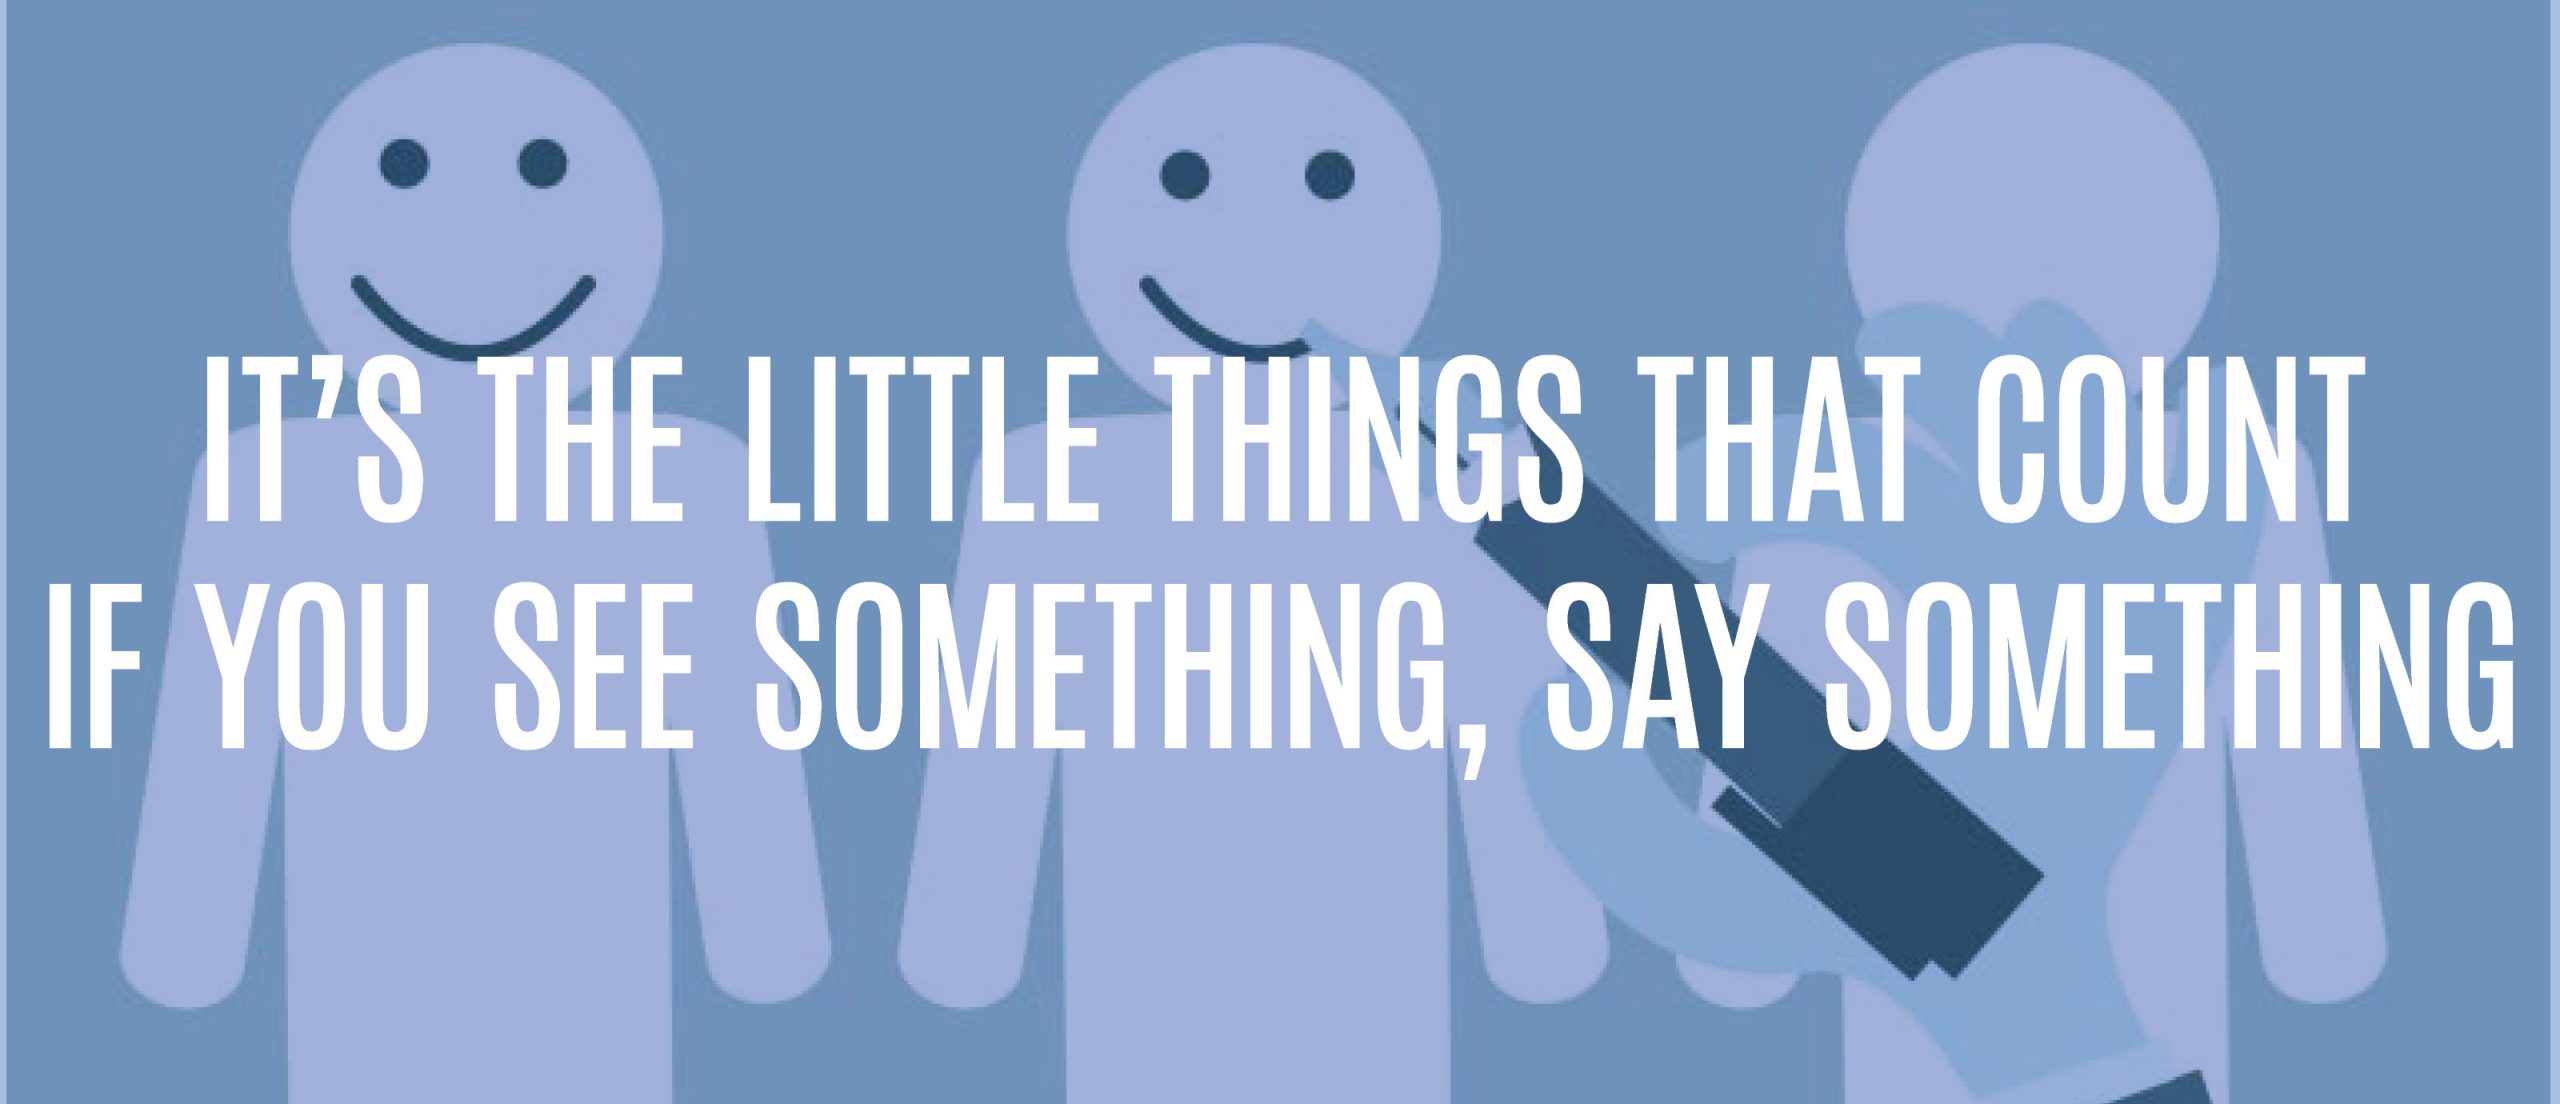 Blog title - it's the little things that count. If you see something, say something.